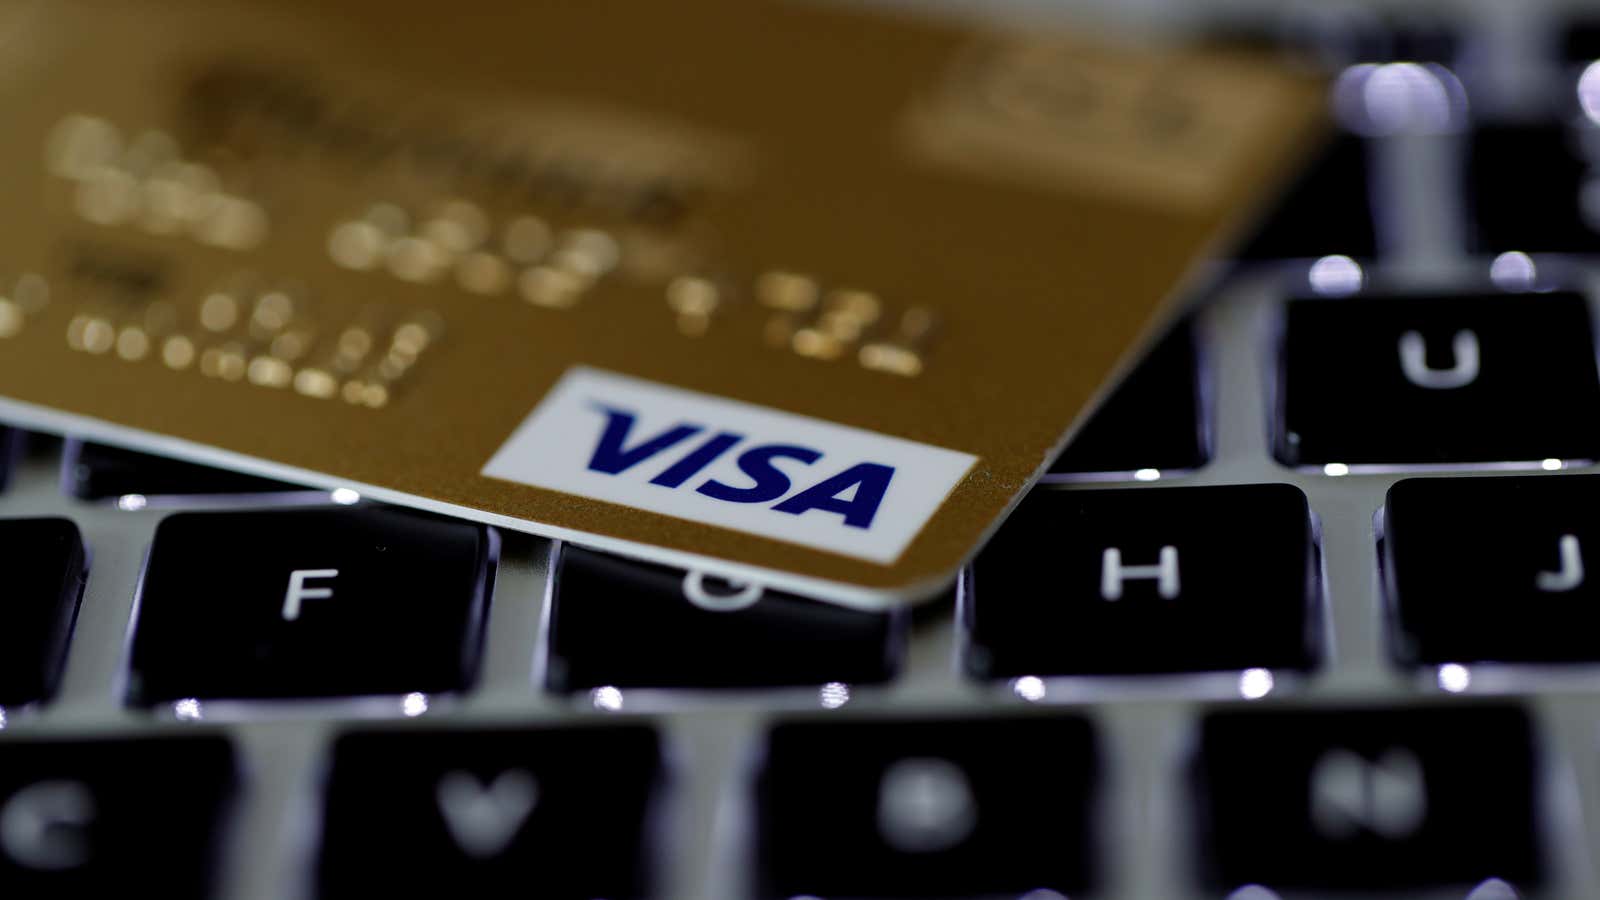 Visa is making more plays for Africa’s fintech startups.